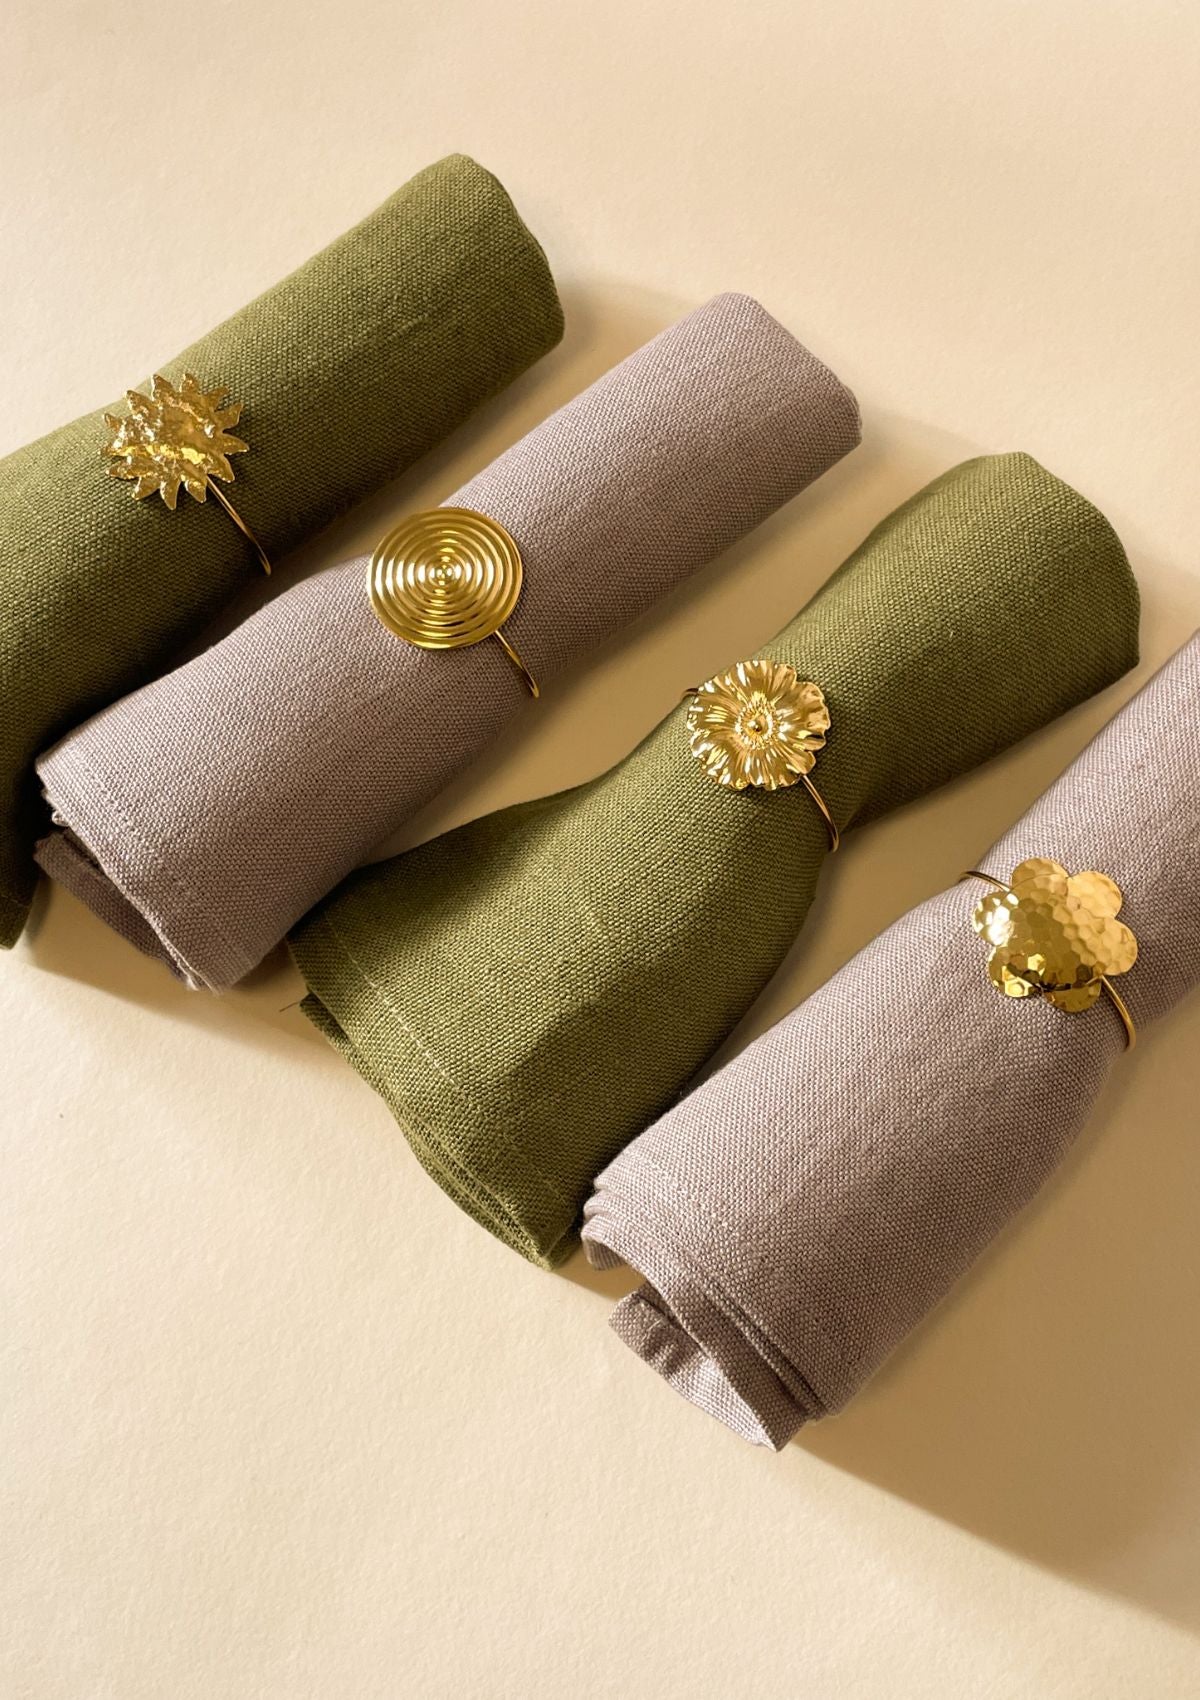 The Flower gold jewelry napkin ring